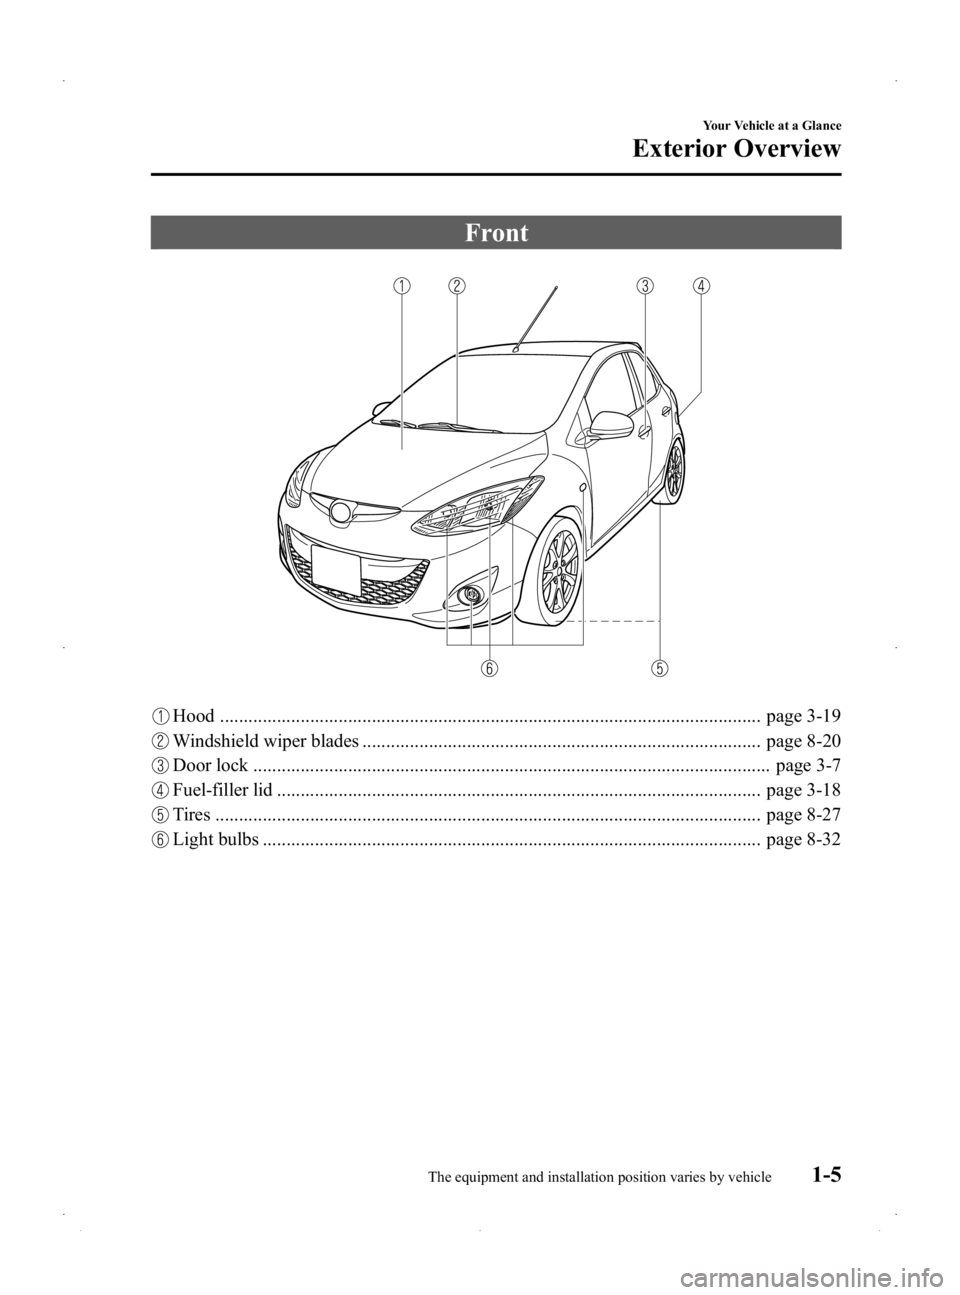 MAZDA MODEL 2 2014  Owners Manual Black plate (11,1)
Front
Hood .................................................................................................................. page 3-19
Windshield wiper blades .....................